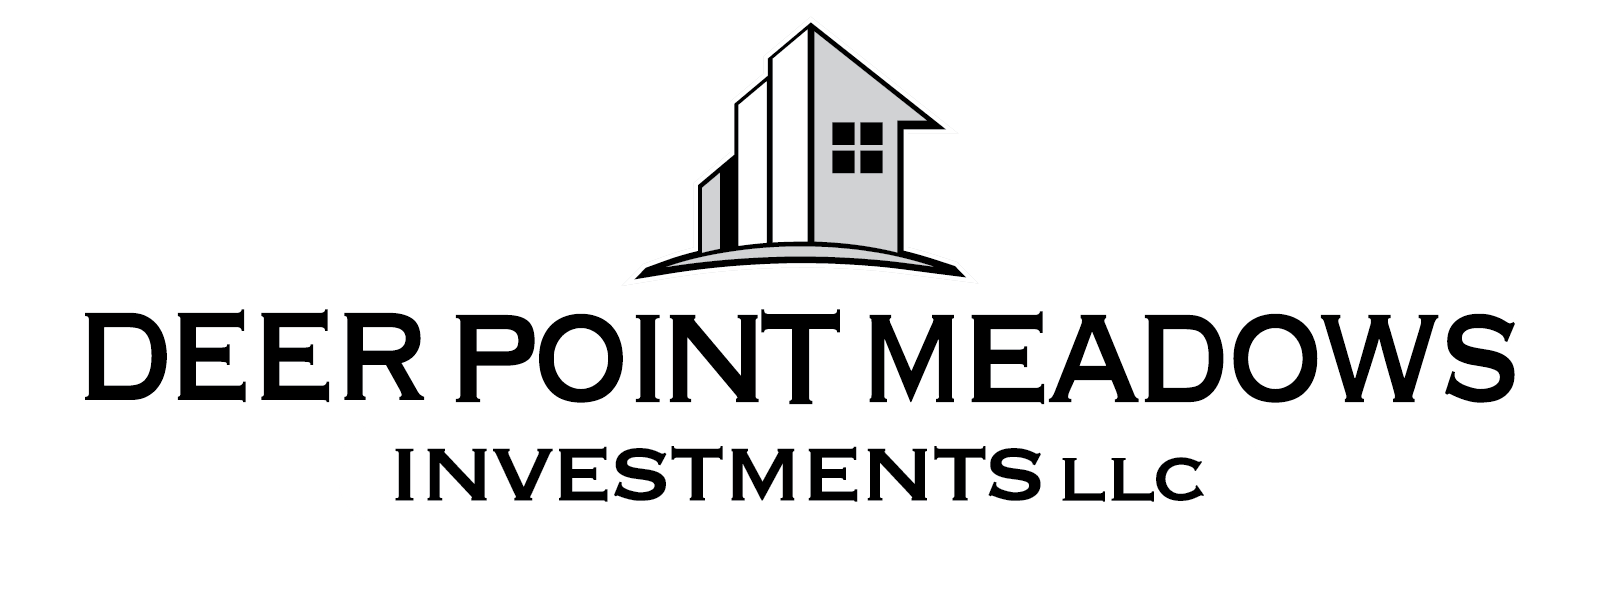 Deer Point Meadows Investments